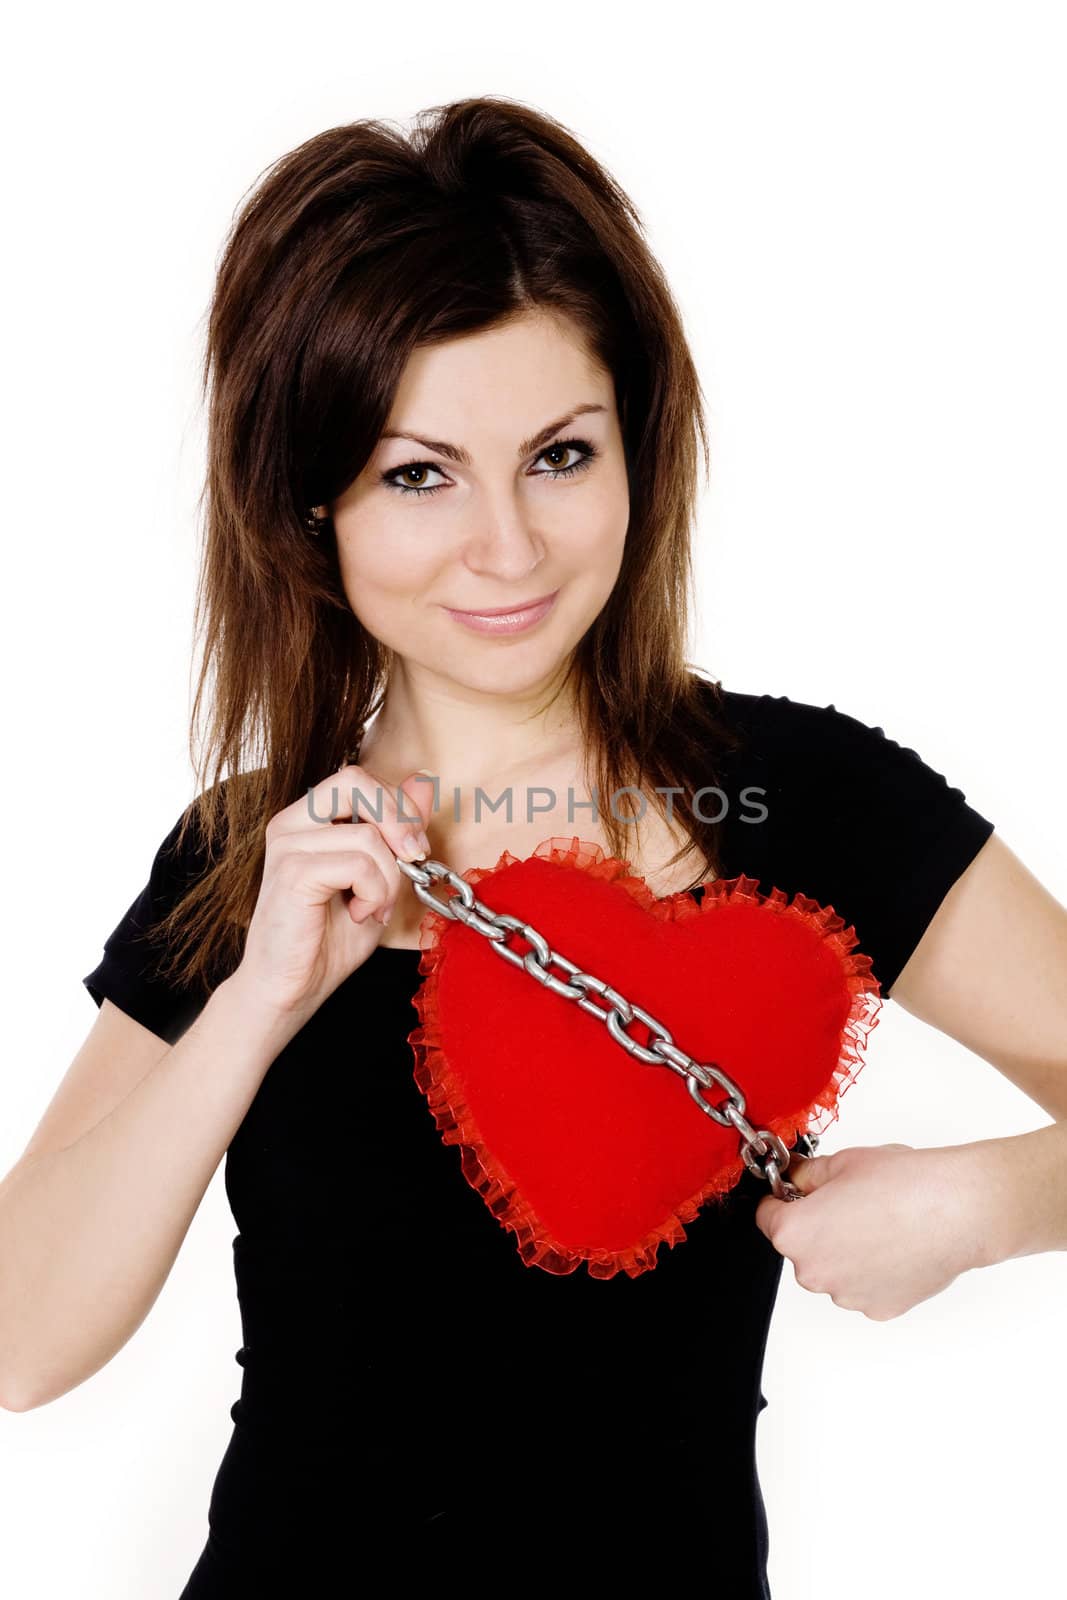 Stock photo: an image of a nice girl with a red heart on a chain